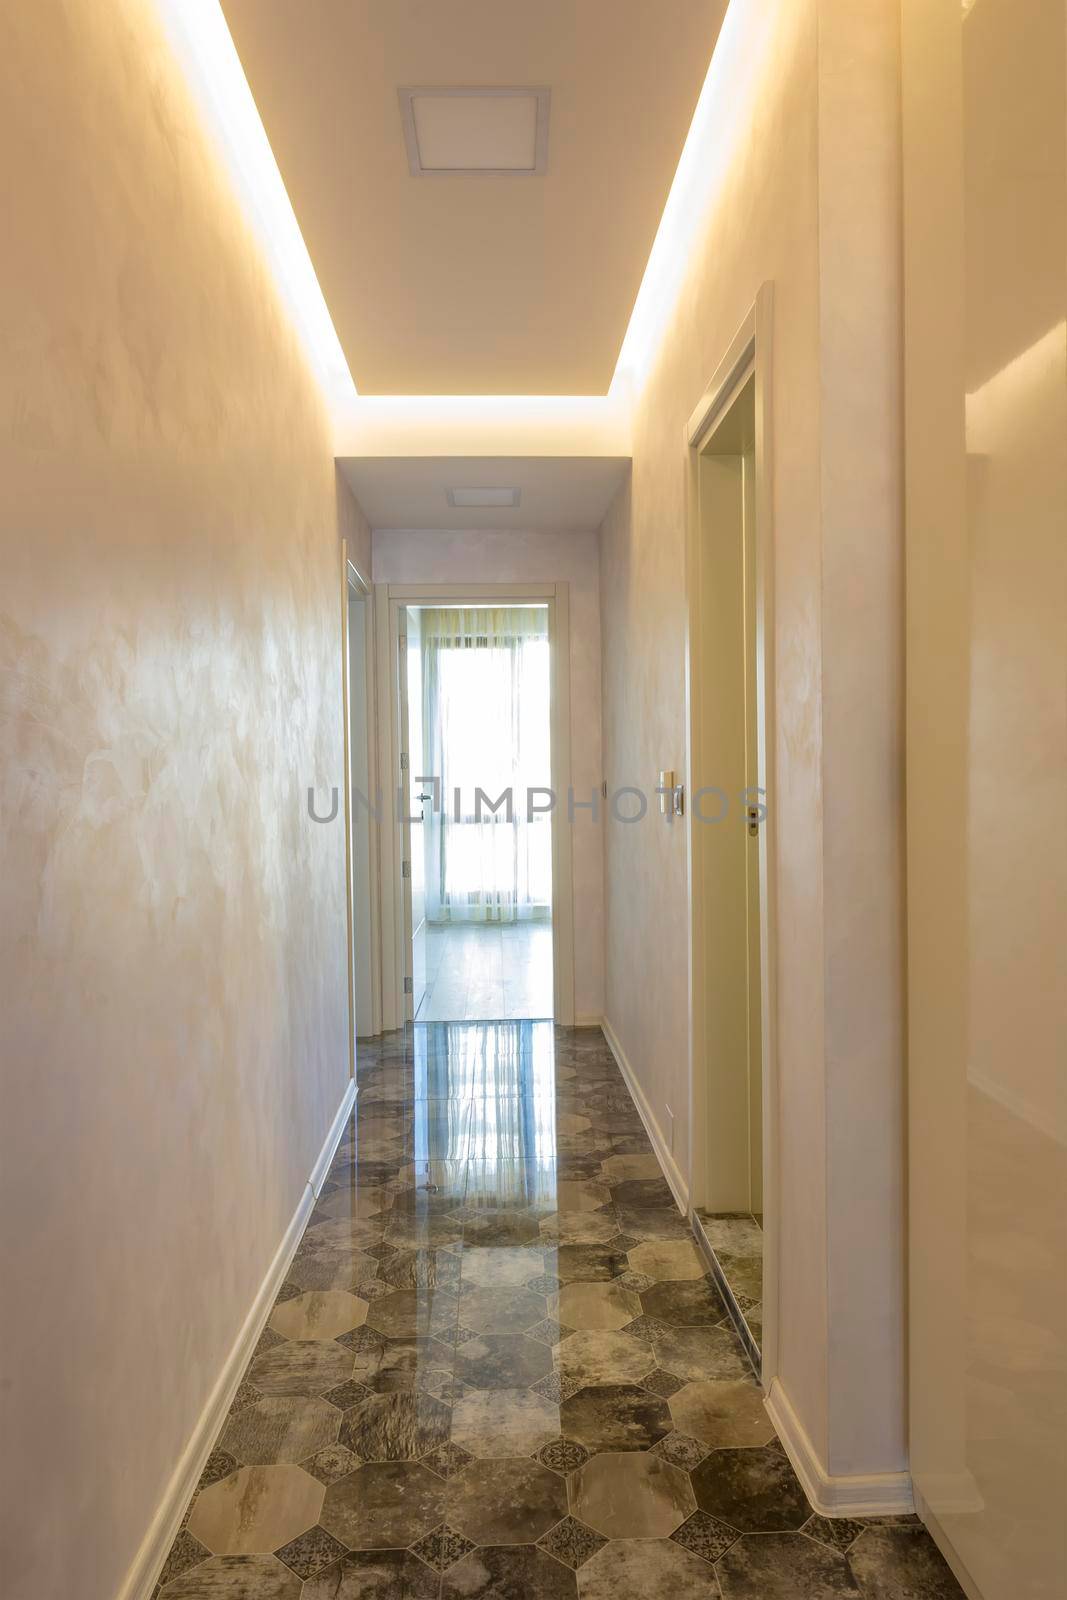 new home corridor with an open door at the end and ceramic tiles by EdVal